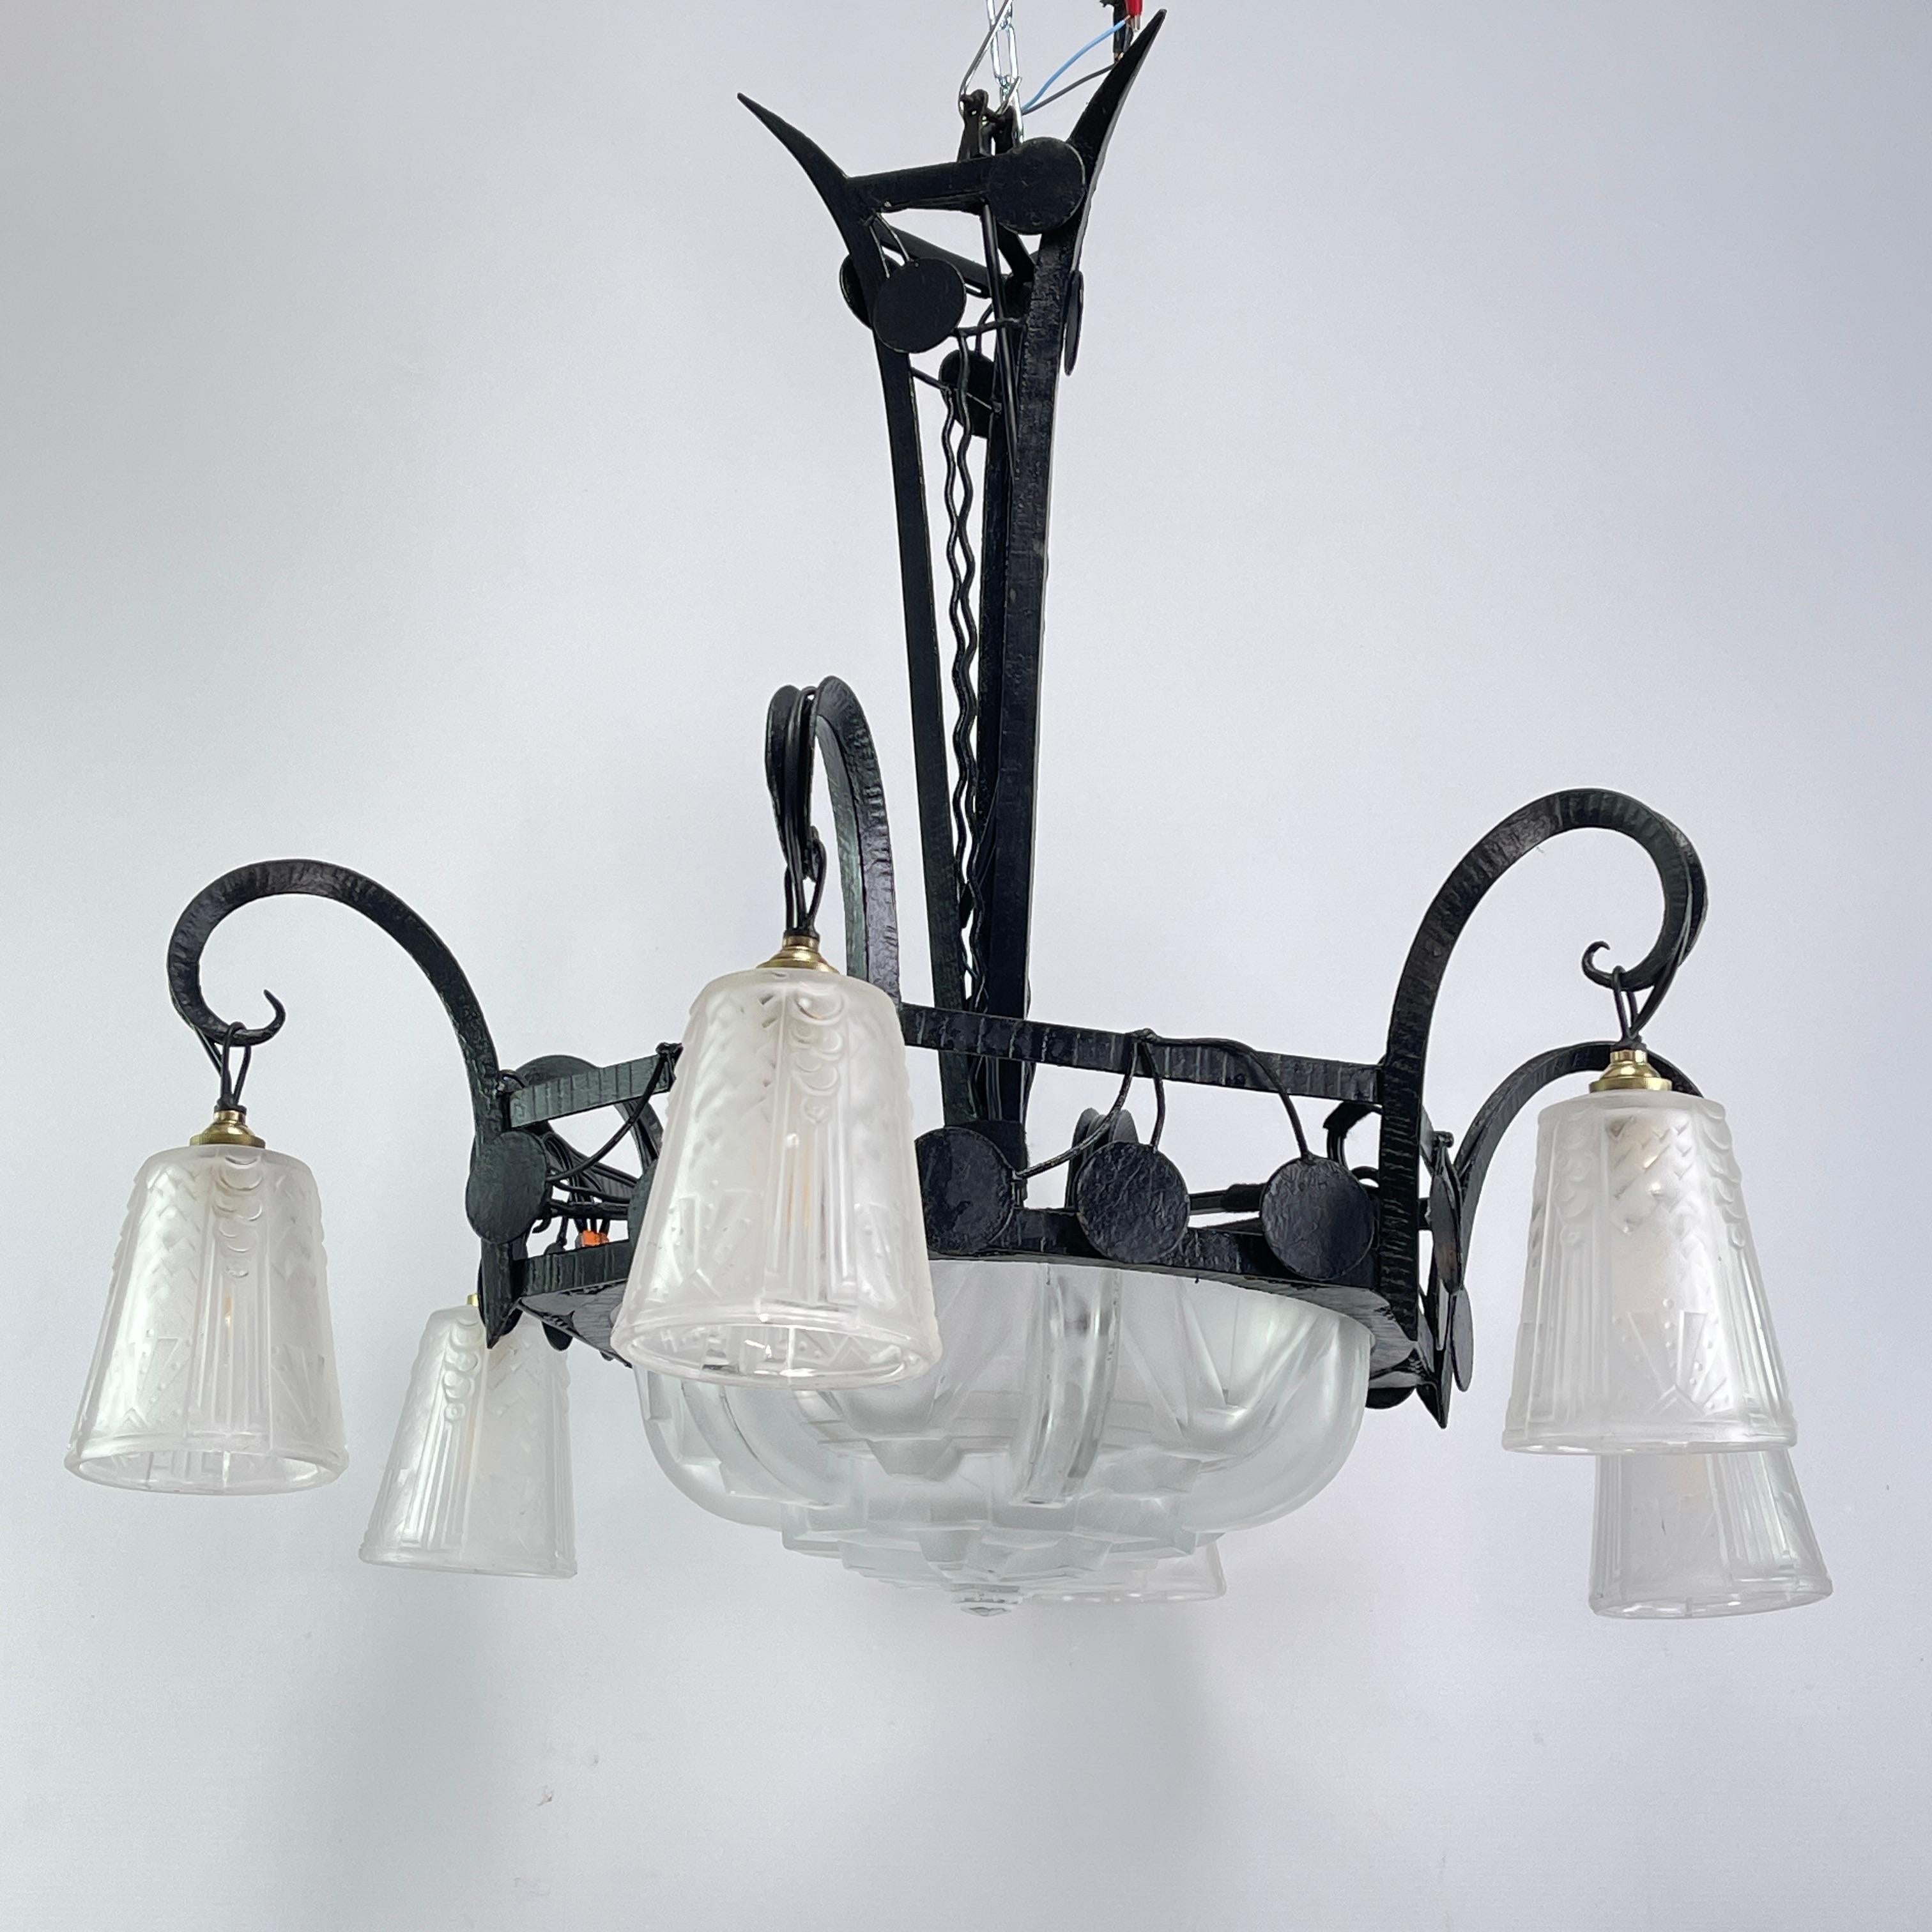 French Art Deco wrought iron Ceiling Lamp by Muller Freres, Luneville, 1930s For Sale